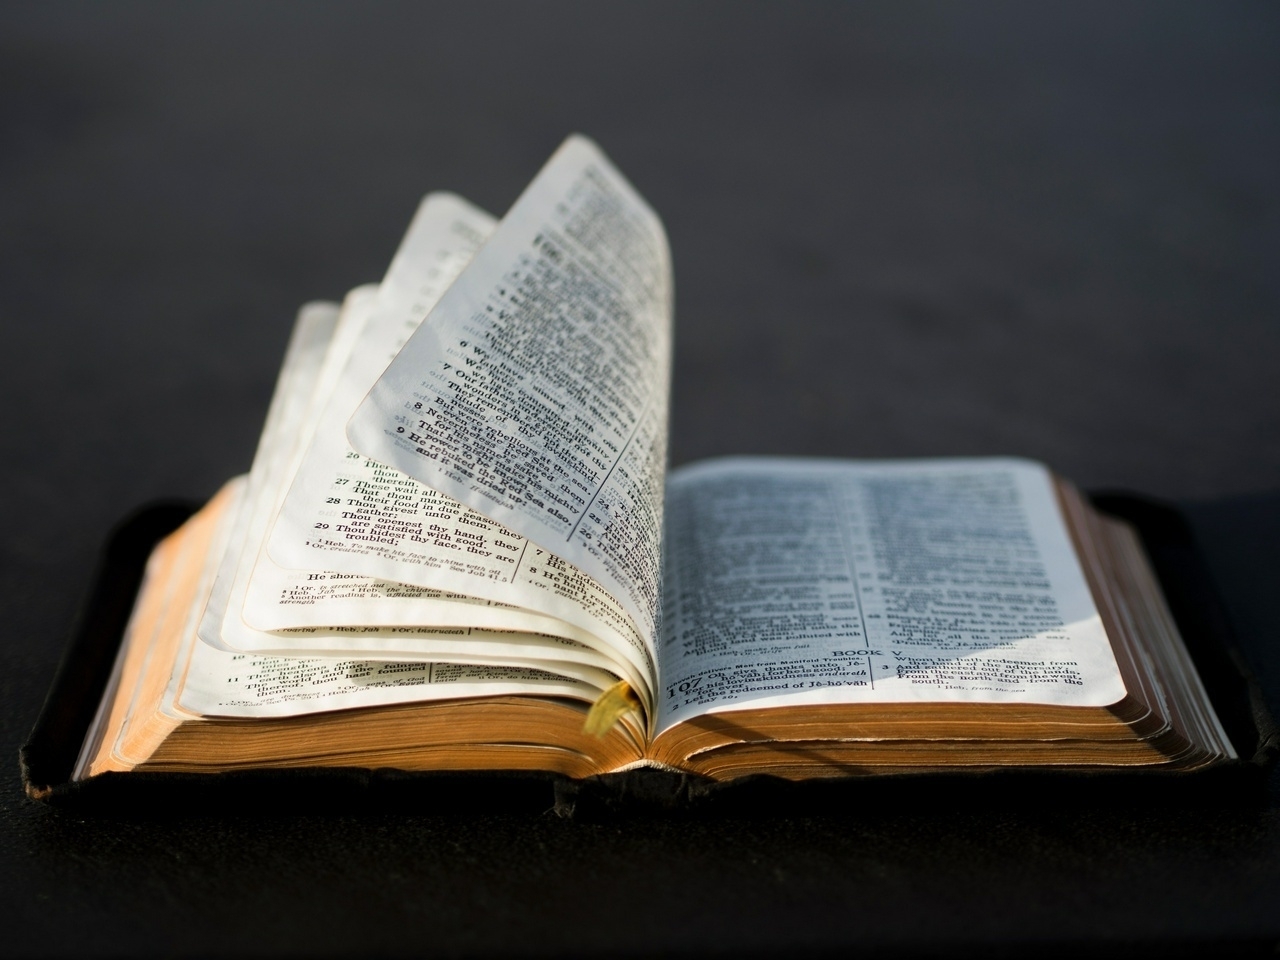 Photo of a Bible by Aaron Burden on Unsplash